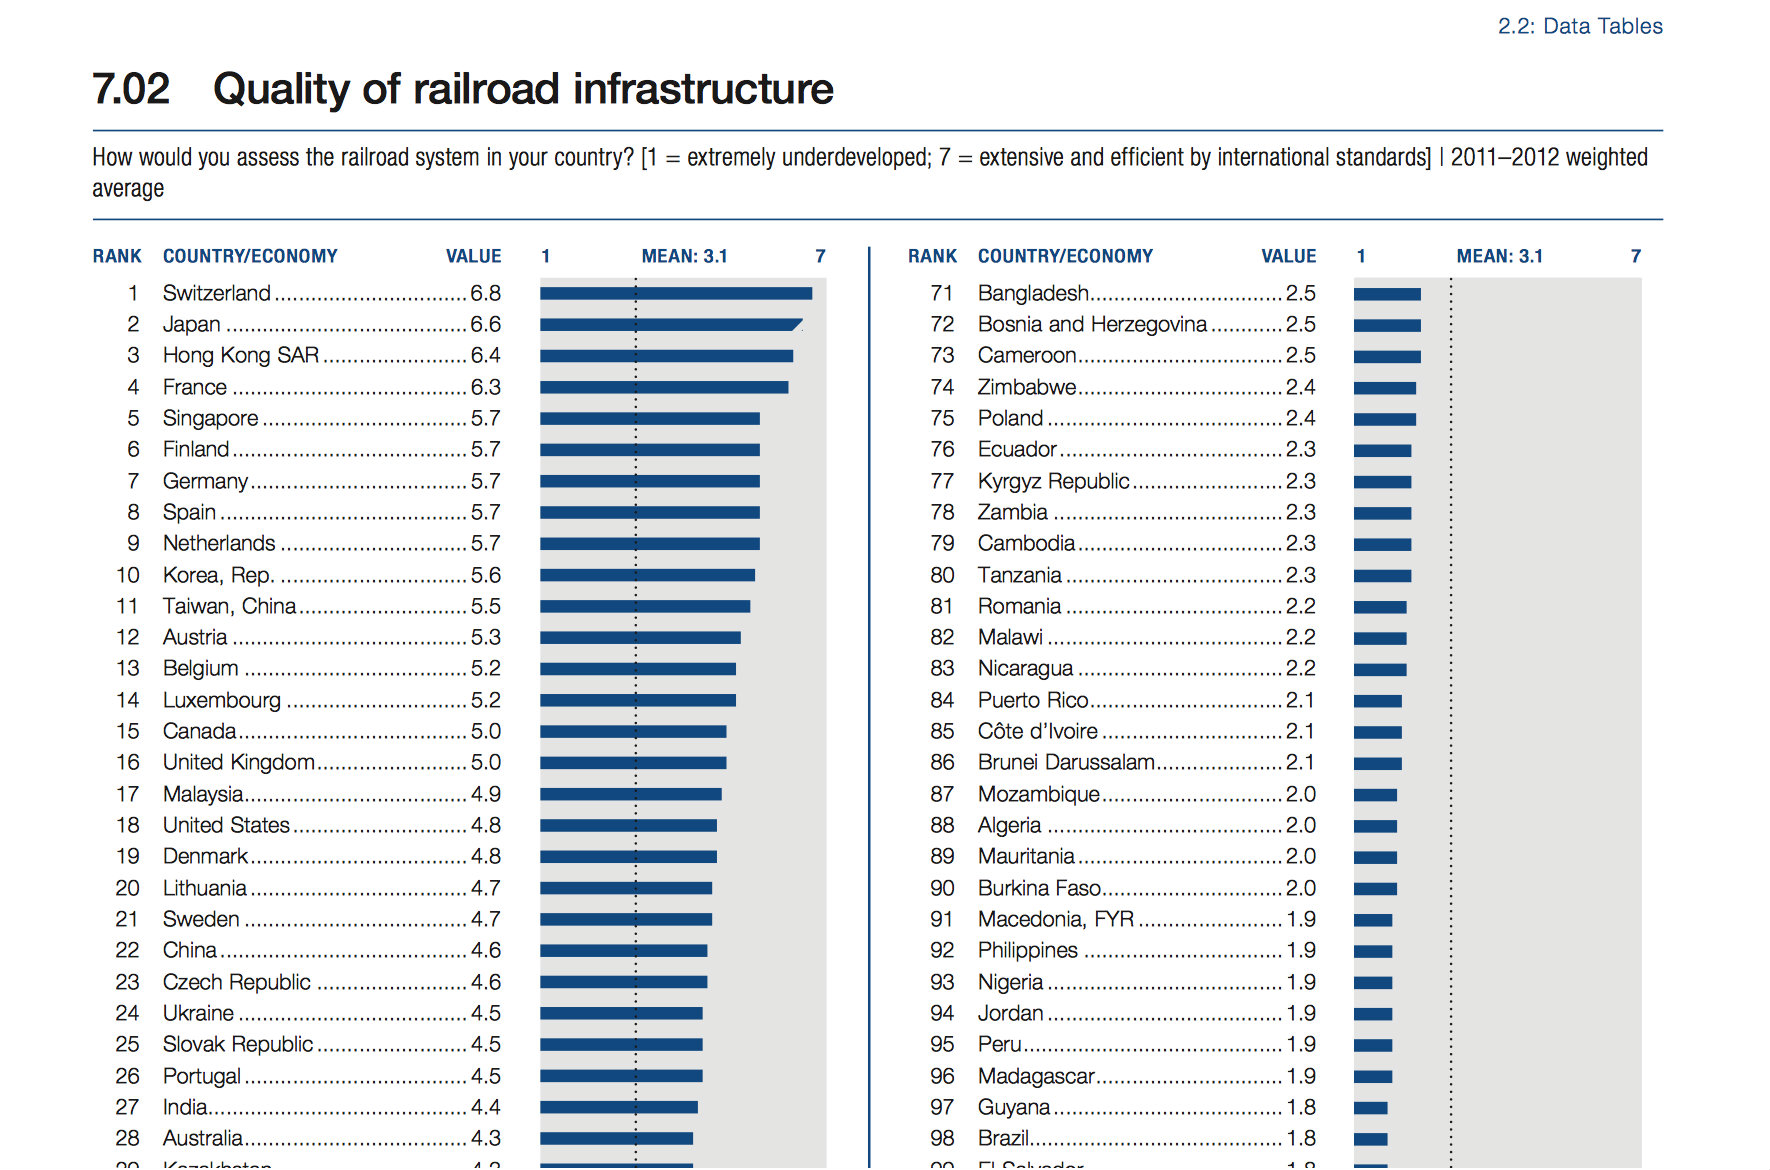 Section: 7.02 Quality of railroad infrastructure. Source: World Economic Forum